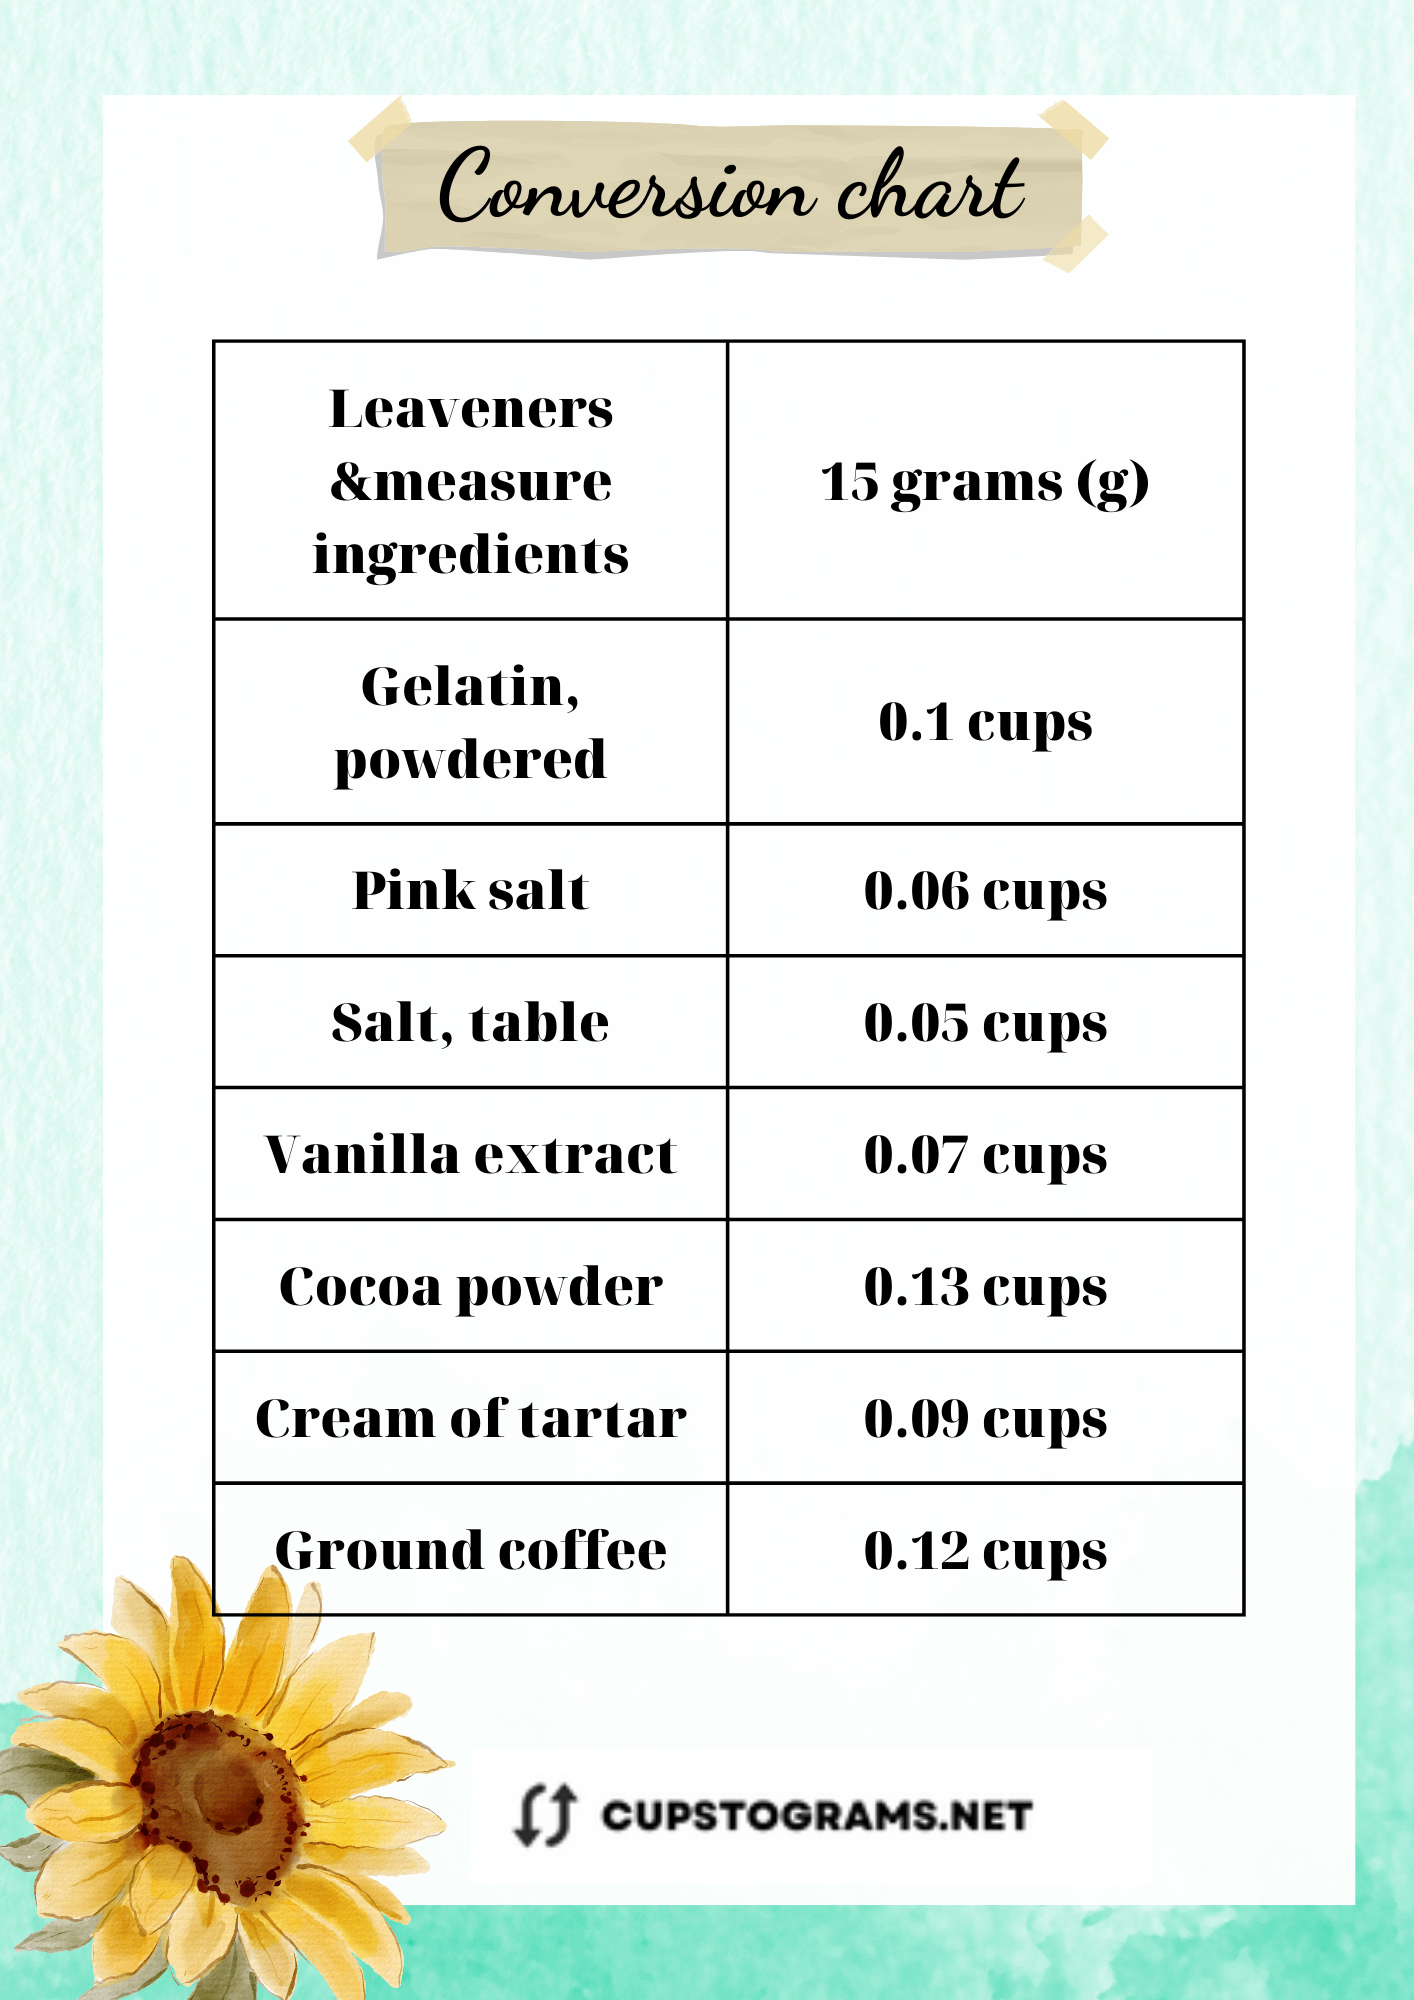 Table conversion: 15 grams of leaveners and small measure ingredients to cups